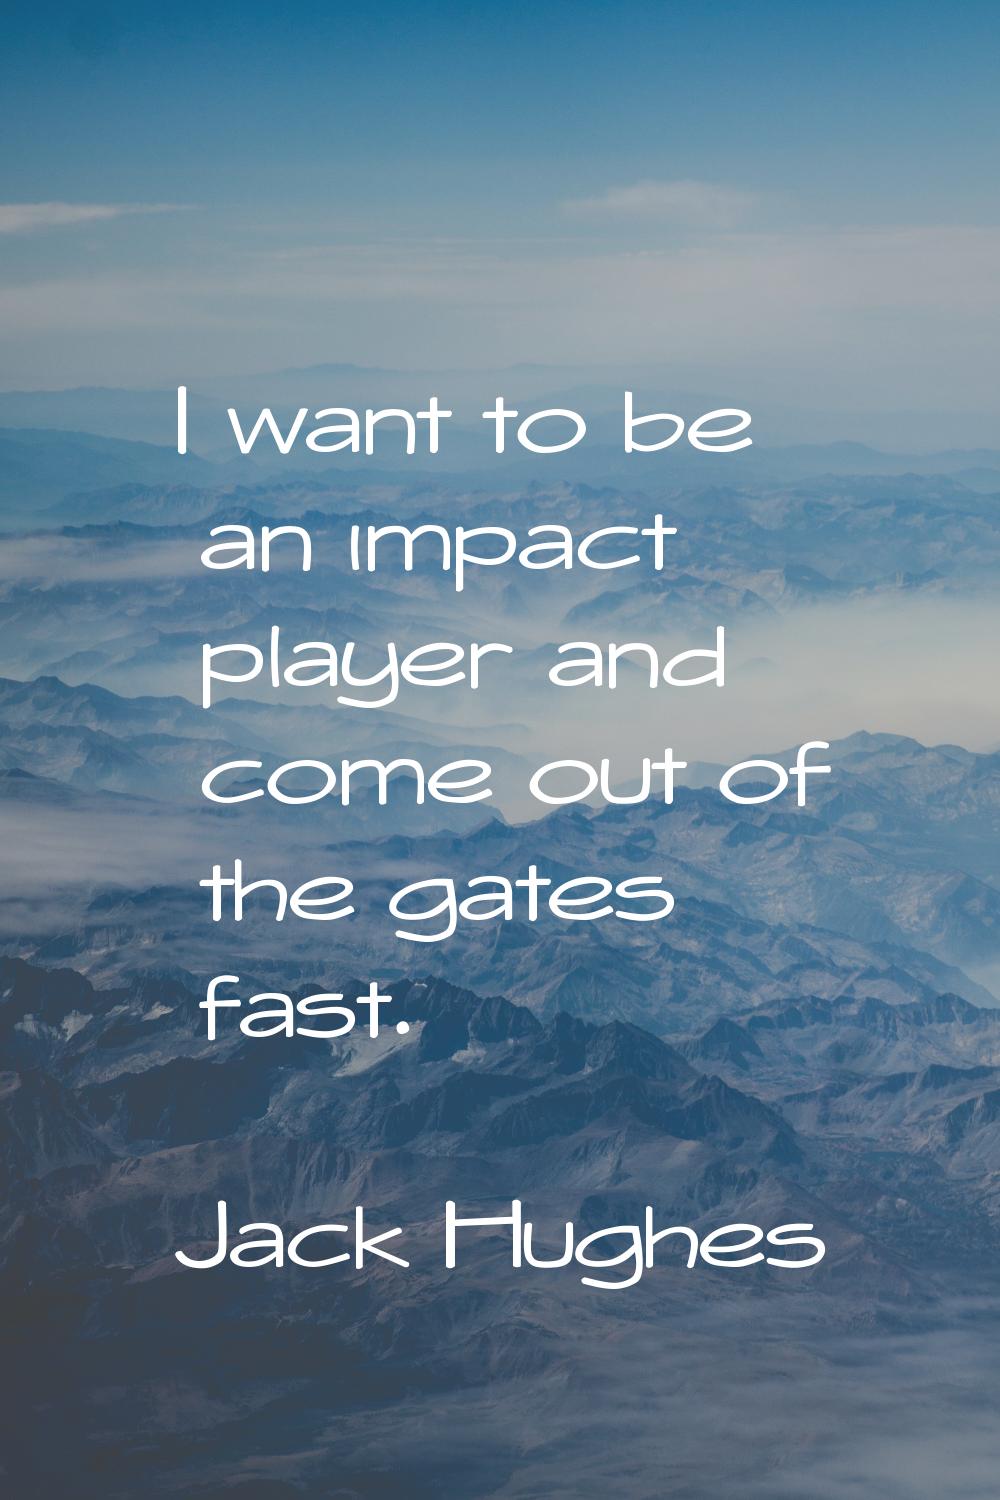 I want to be an impact player and come out of the gates fast.